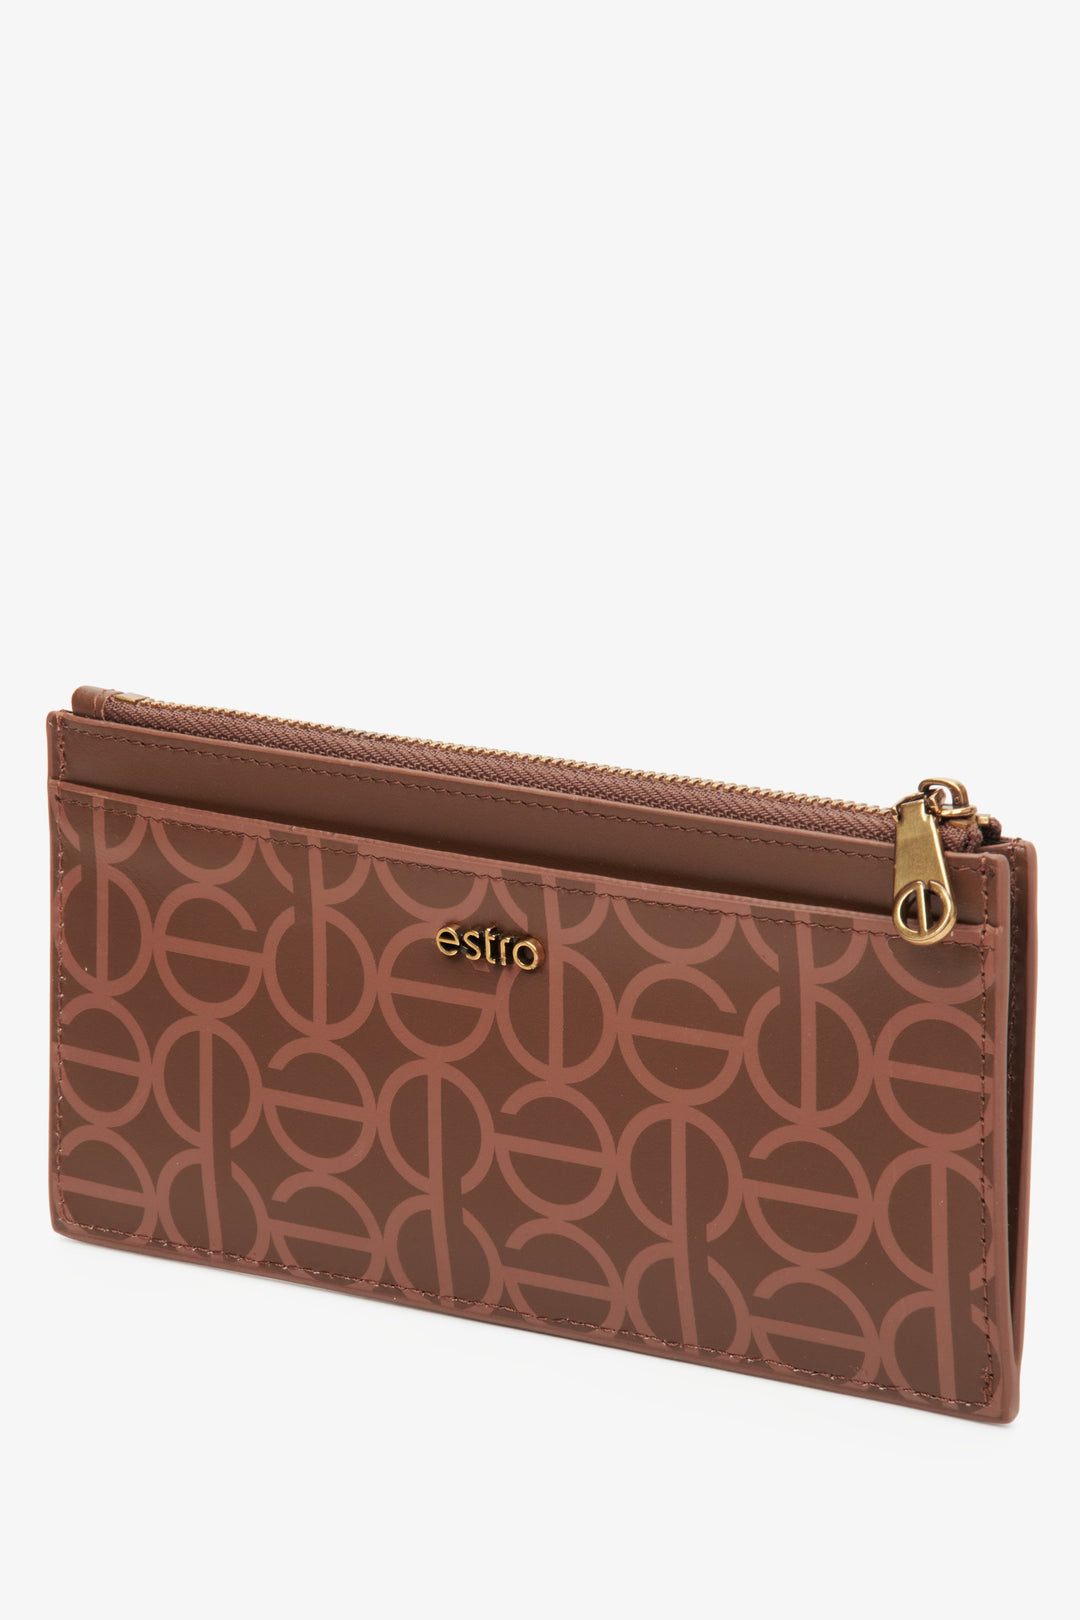 Stylish, large, women's brown wristlet by Estro, made of genuine leather with golden accents.